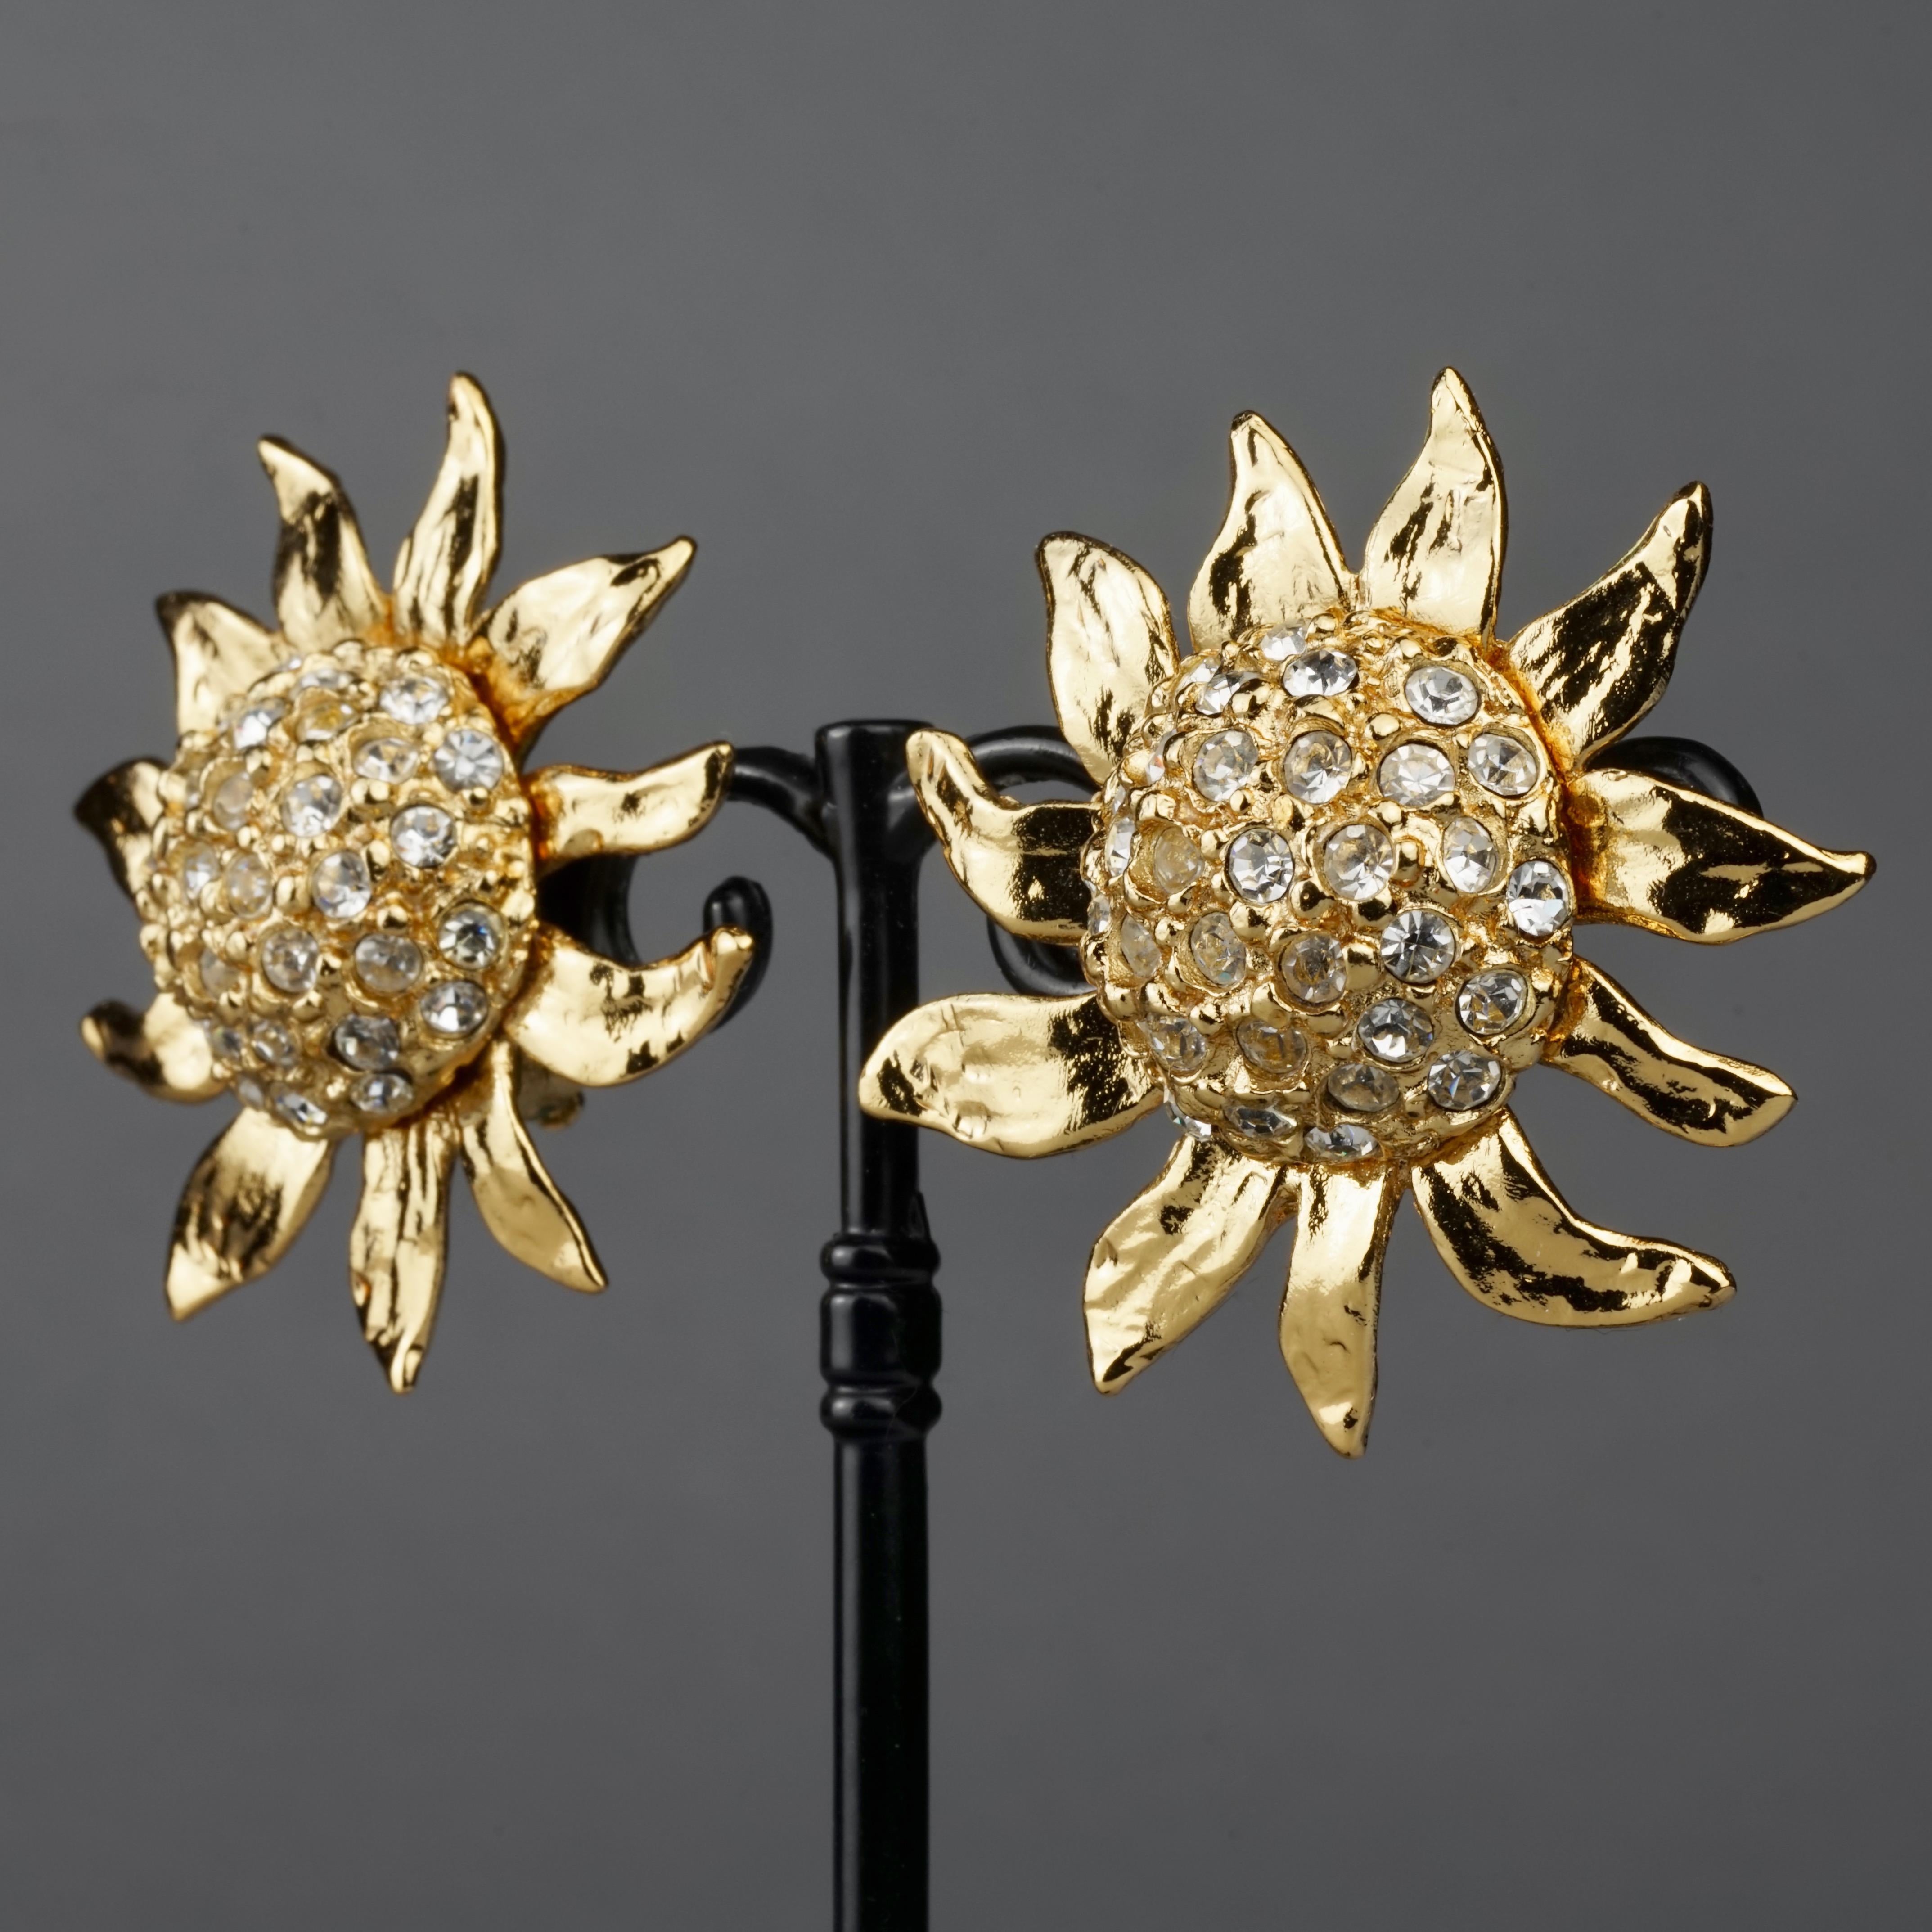 Vintage Massive YVES SAINT LAURENT Ysl Sunflower Earrings In Excellent Condition For Sale In Kingersheim, Alsace